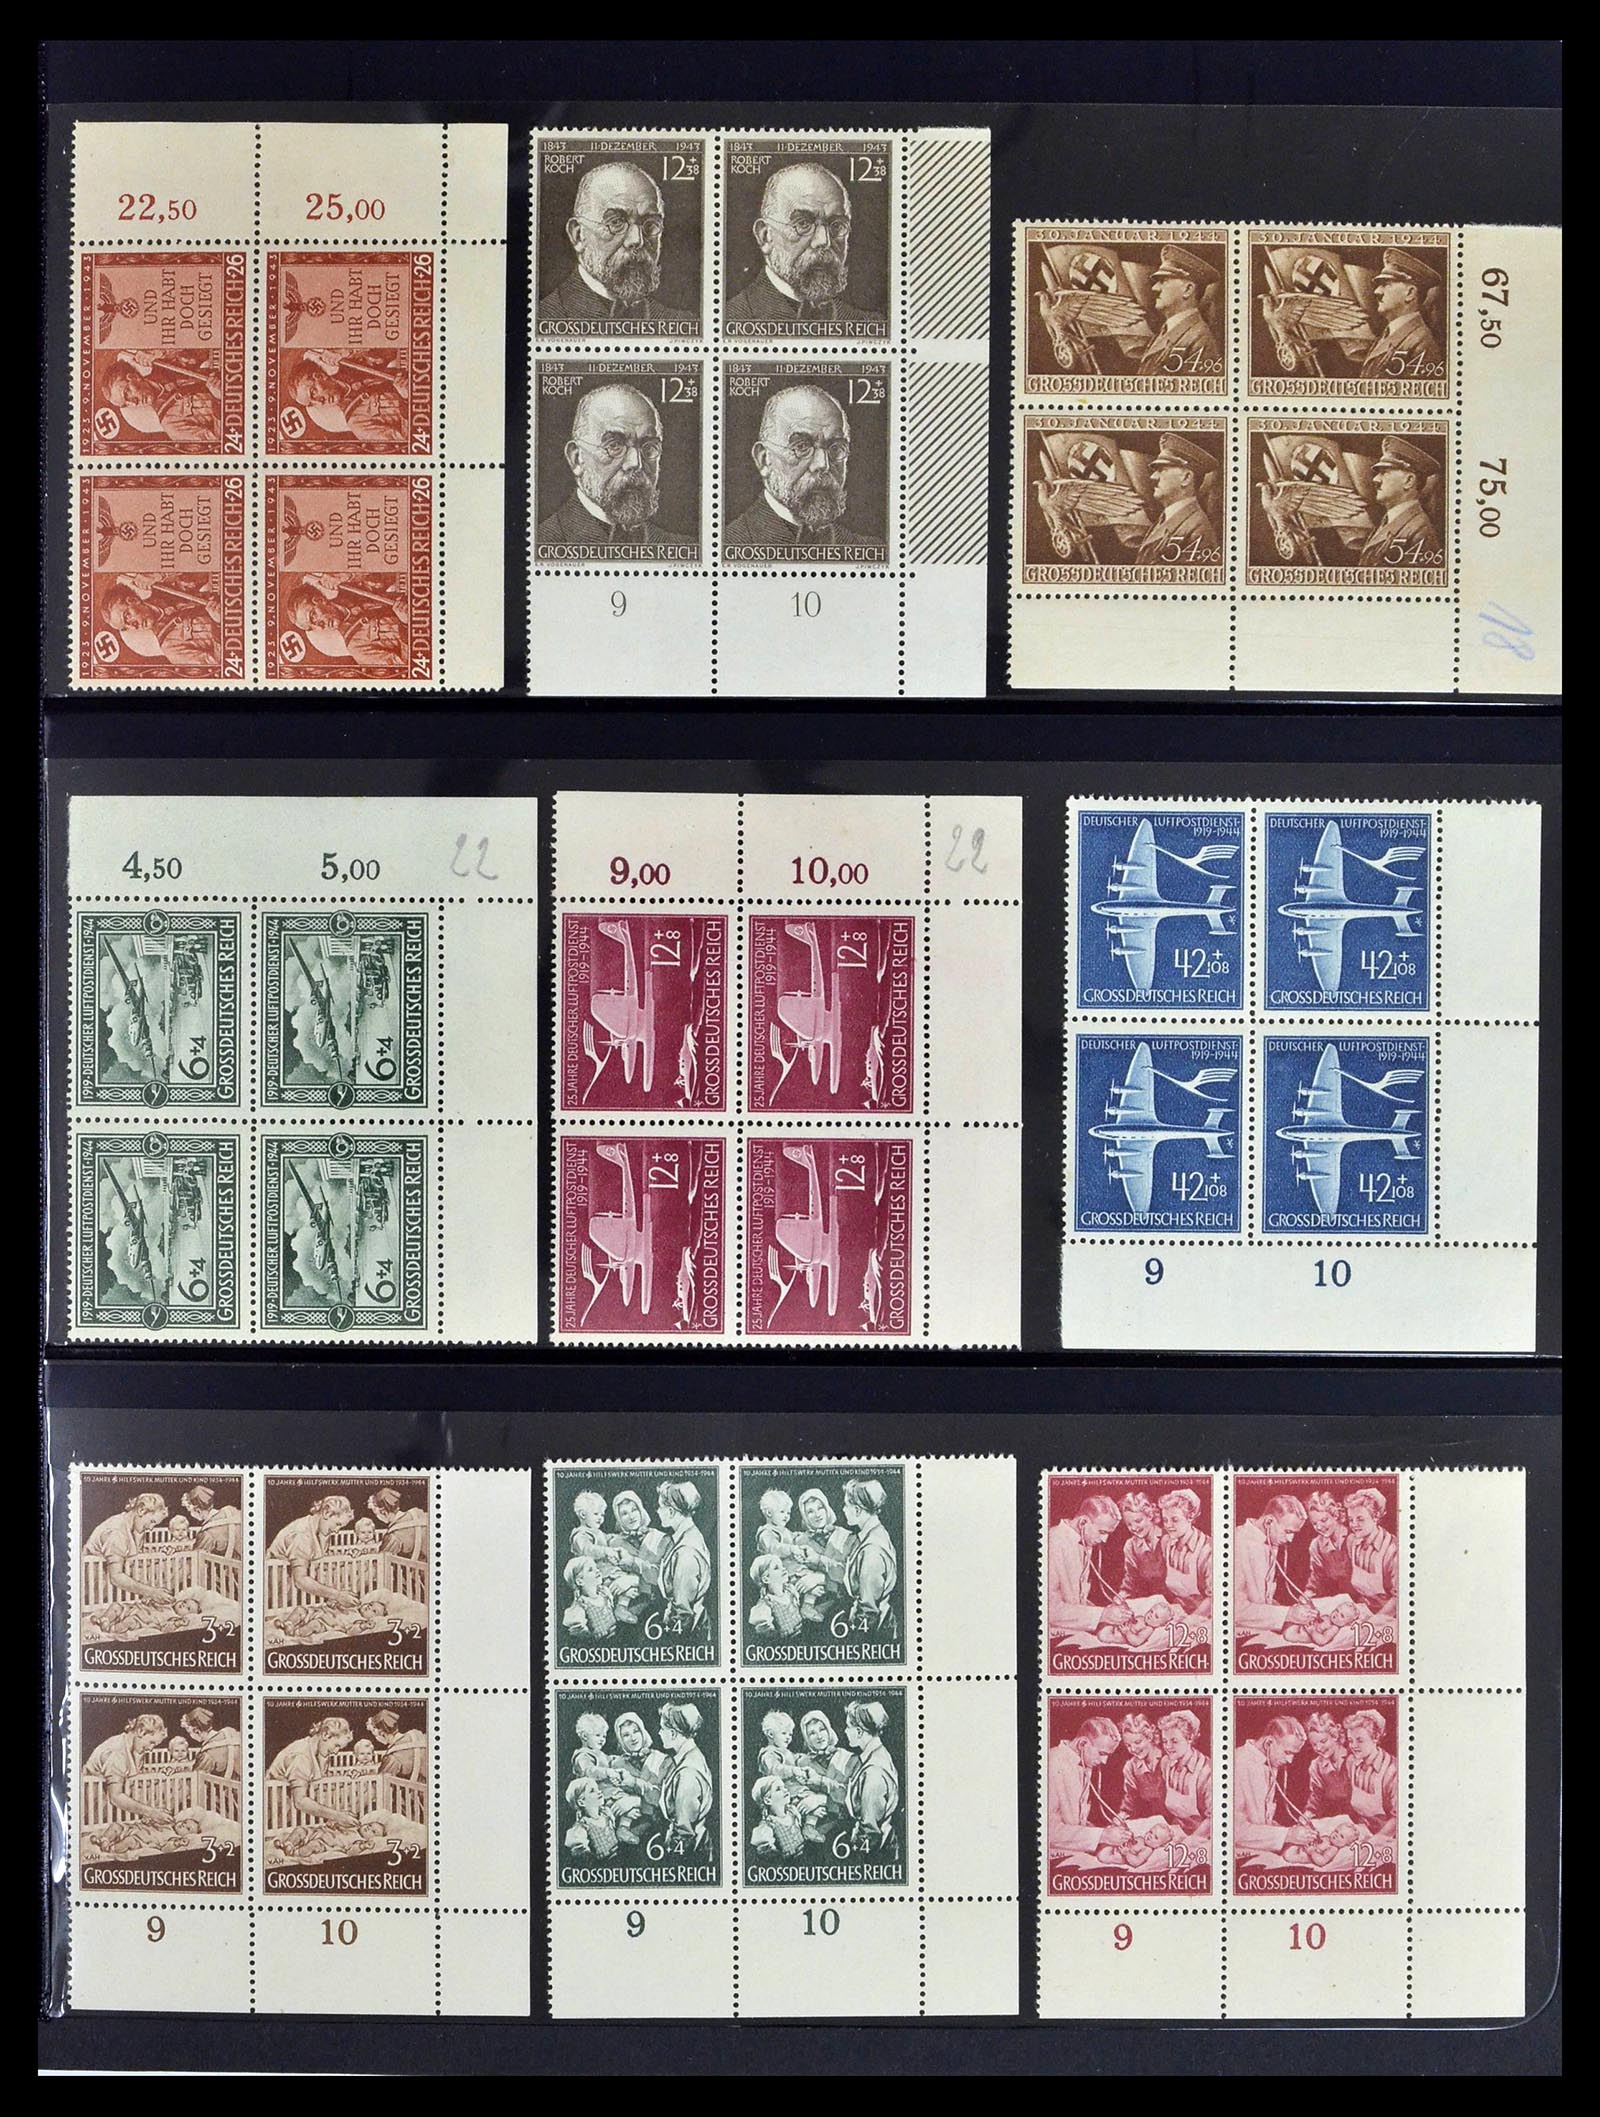 39255 0027 - Stamp collection 39255 German Reich MNH blocks of 4.